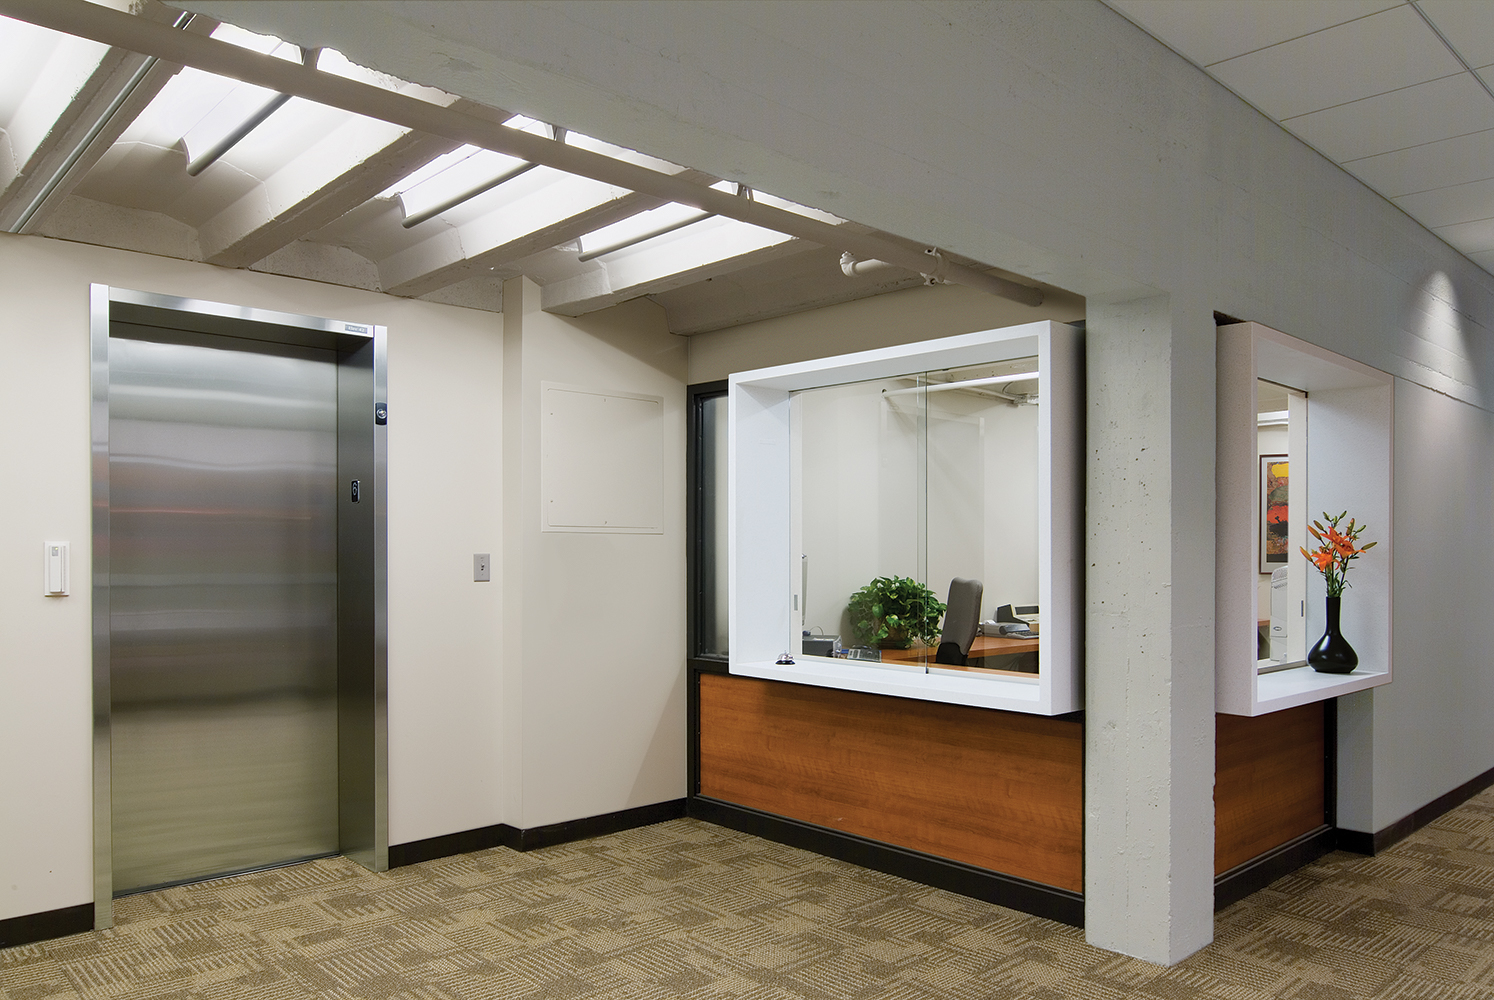 Ether ceiling-mounted luminaires in a medical lighting application above a clinic elevator